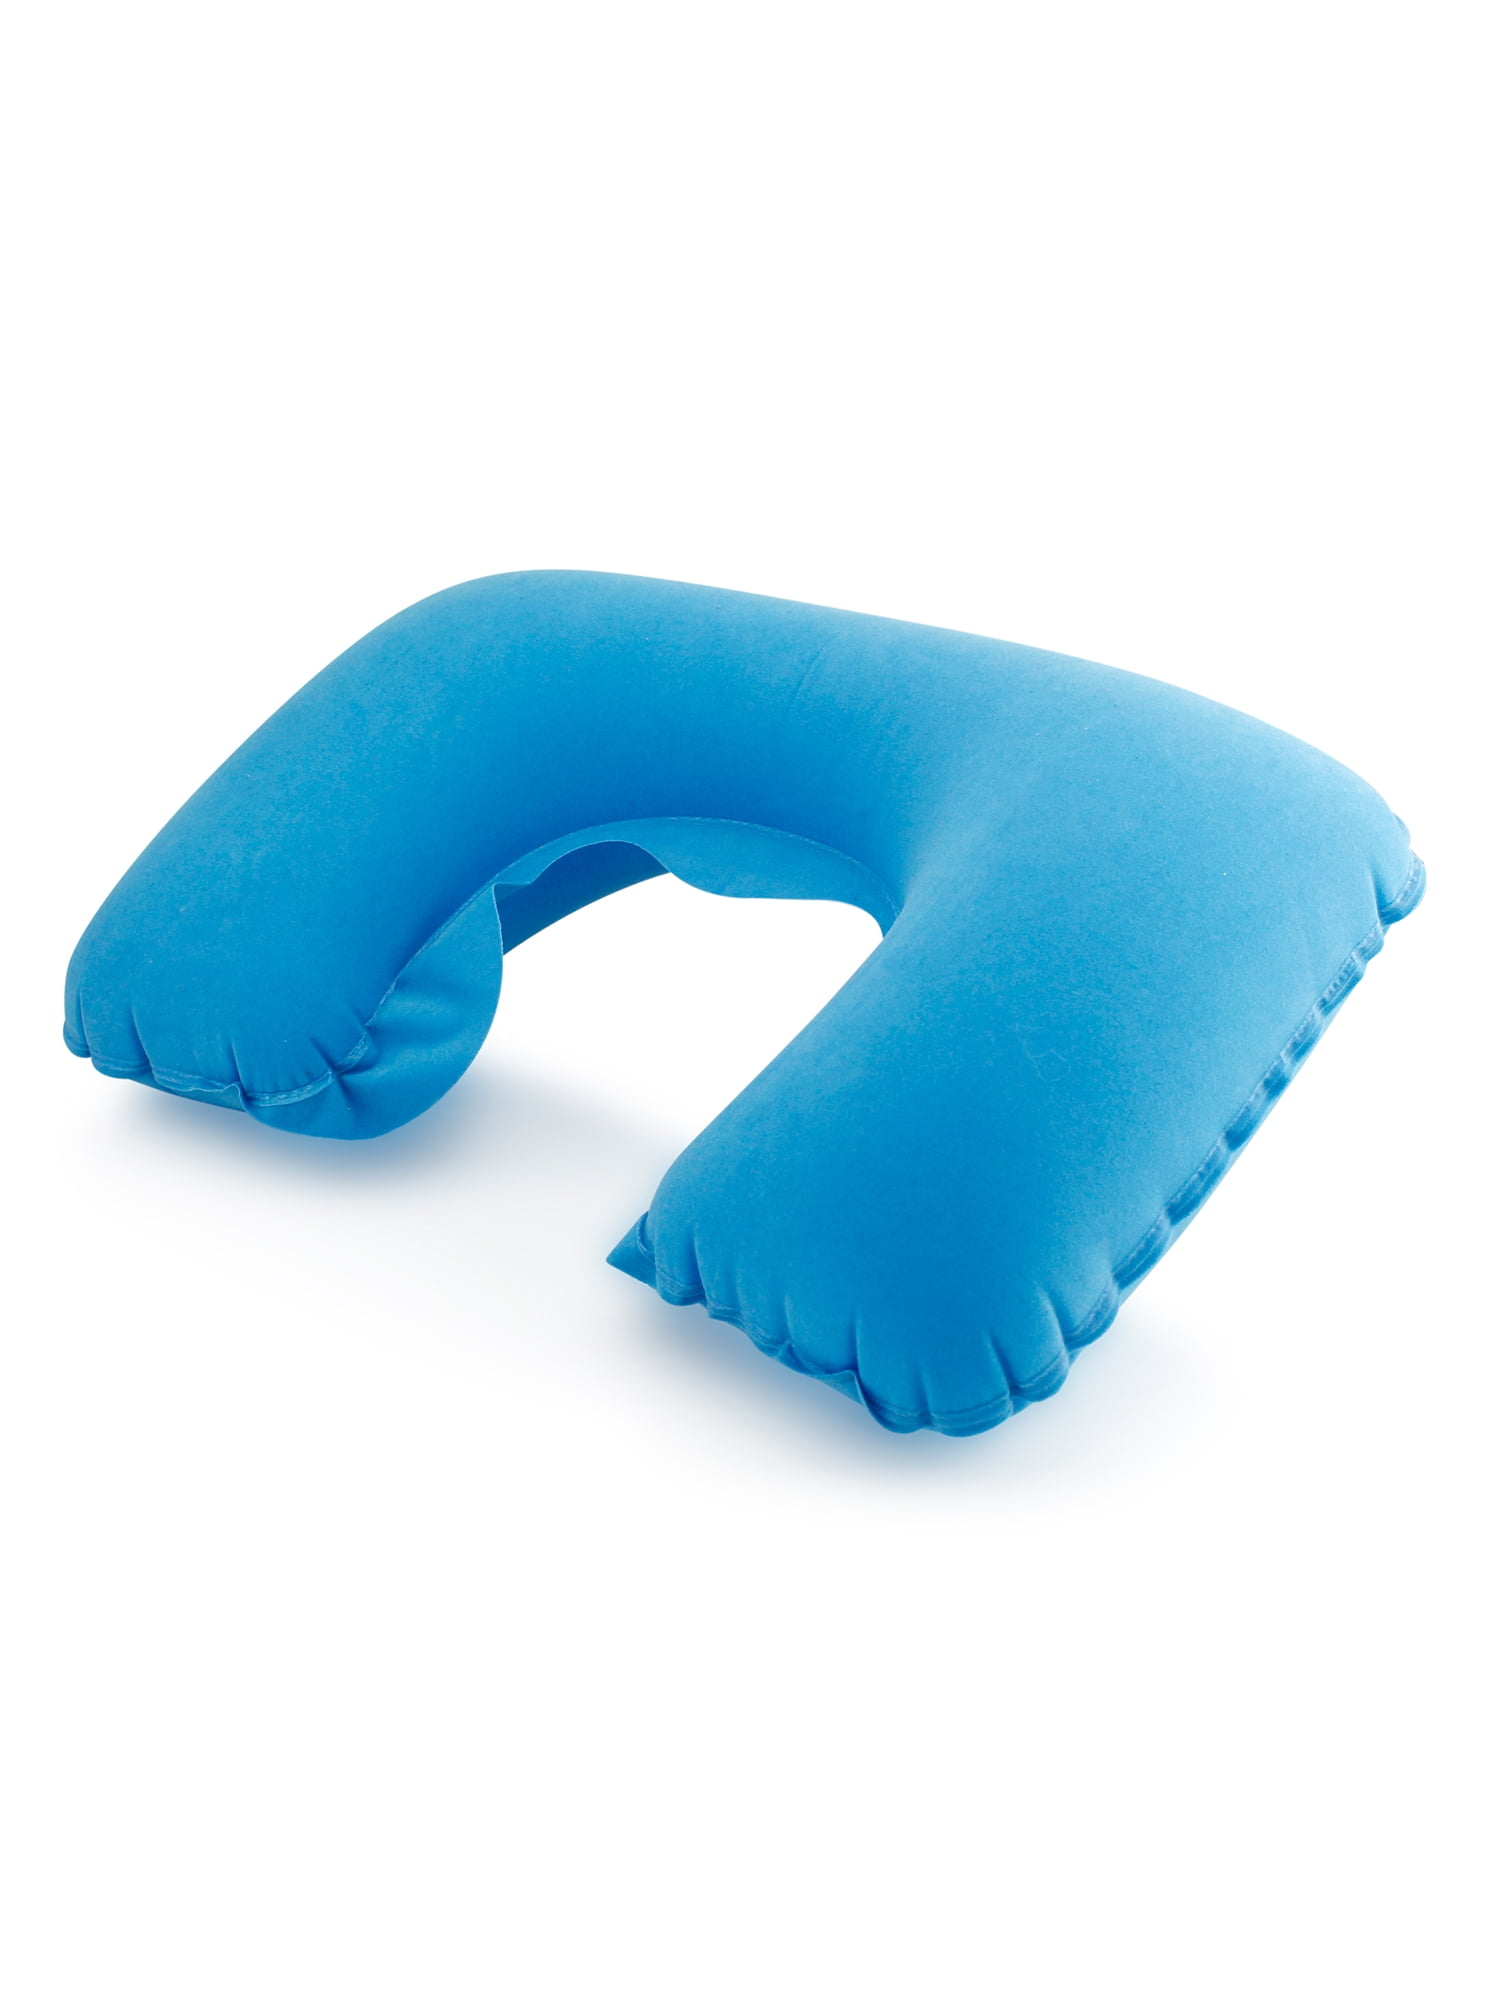 Travel Pillow Soft Inflatable  Air Cushion Neck Rest U-Shaped Compact Flight 2pk 